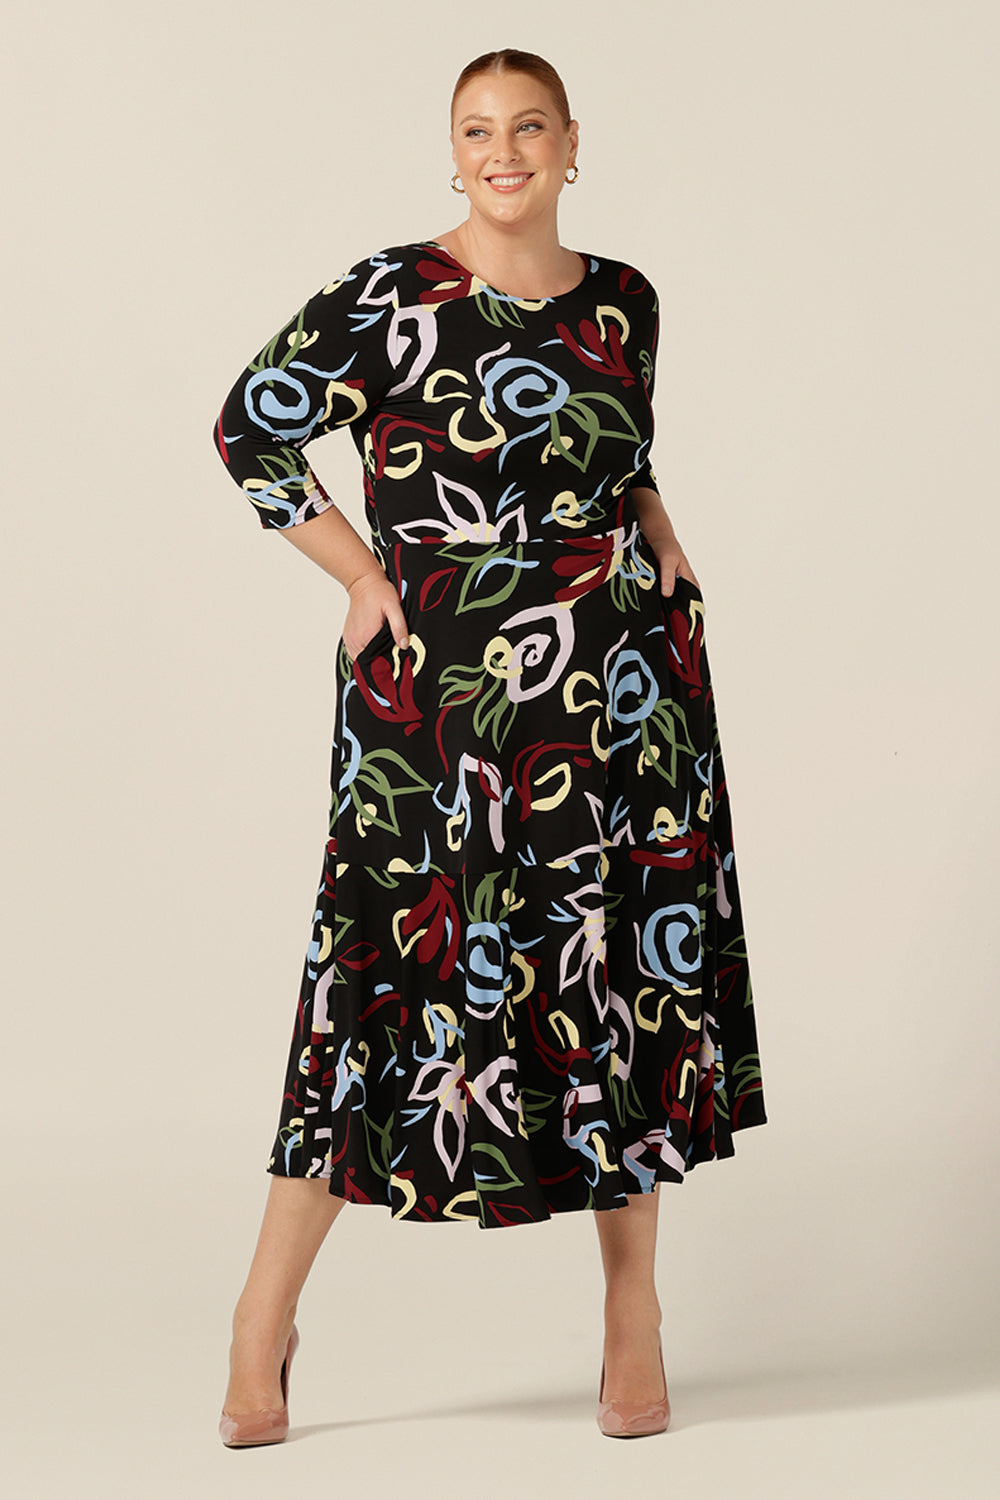 Wearing a reversible dress for women, this size 18, fuller figure woman styles it as boat neck dress. Featuring 3/4 sleeves and full midi-length skirt with ruffle hem, this dress has a black-base print for easy styling for work and corporate wear. 